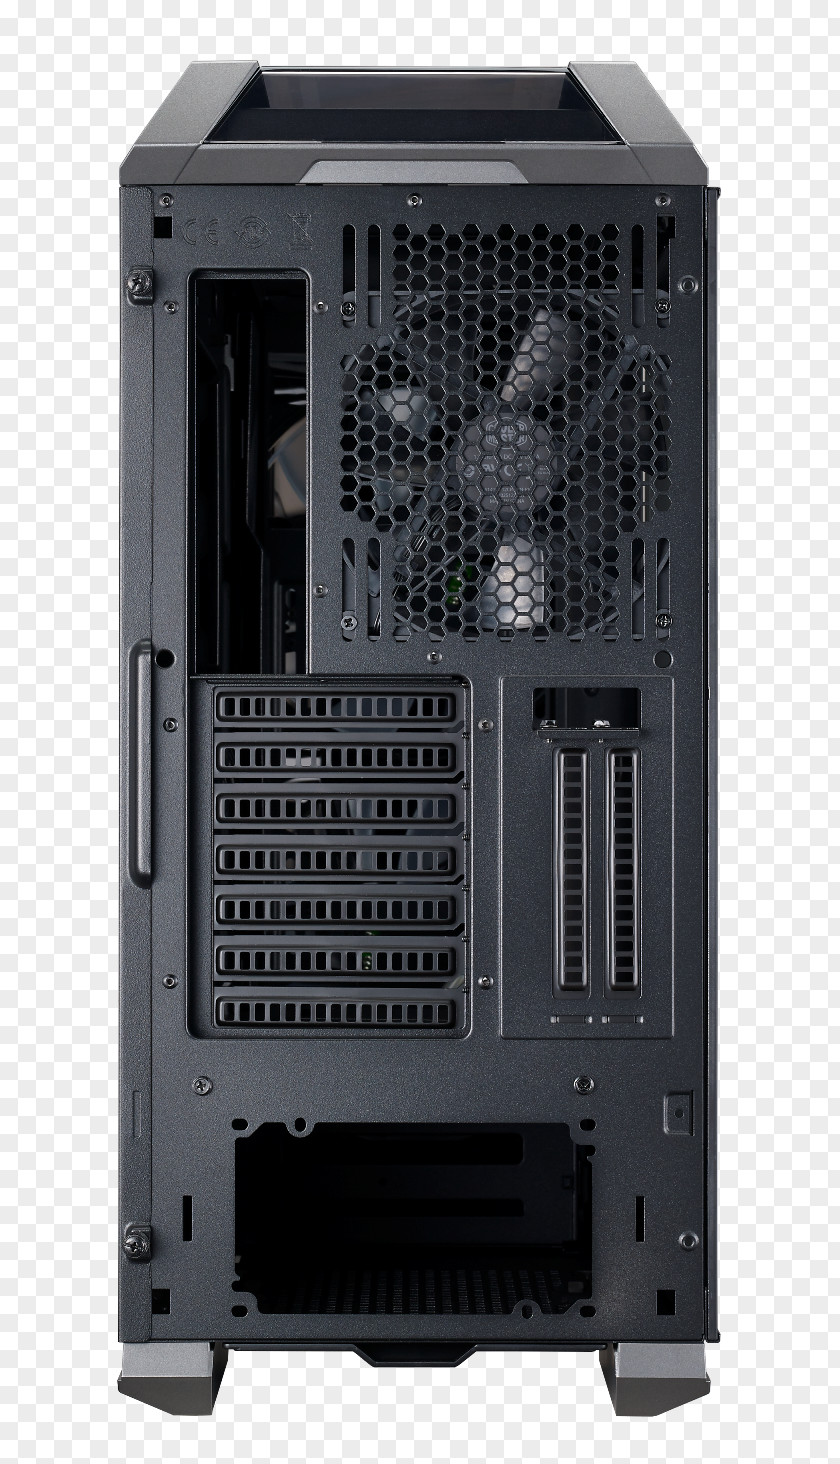 Computer Cases & Housings Power Supply Unit Cooler Master Silencio 352 ATX PNG